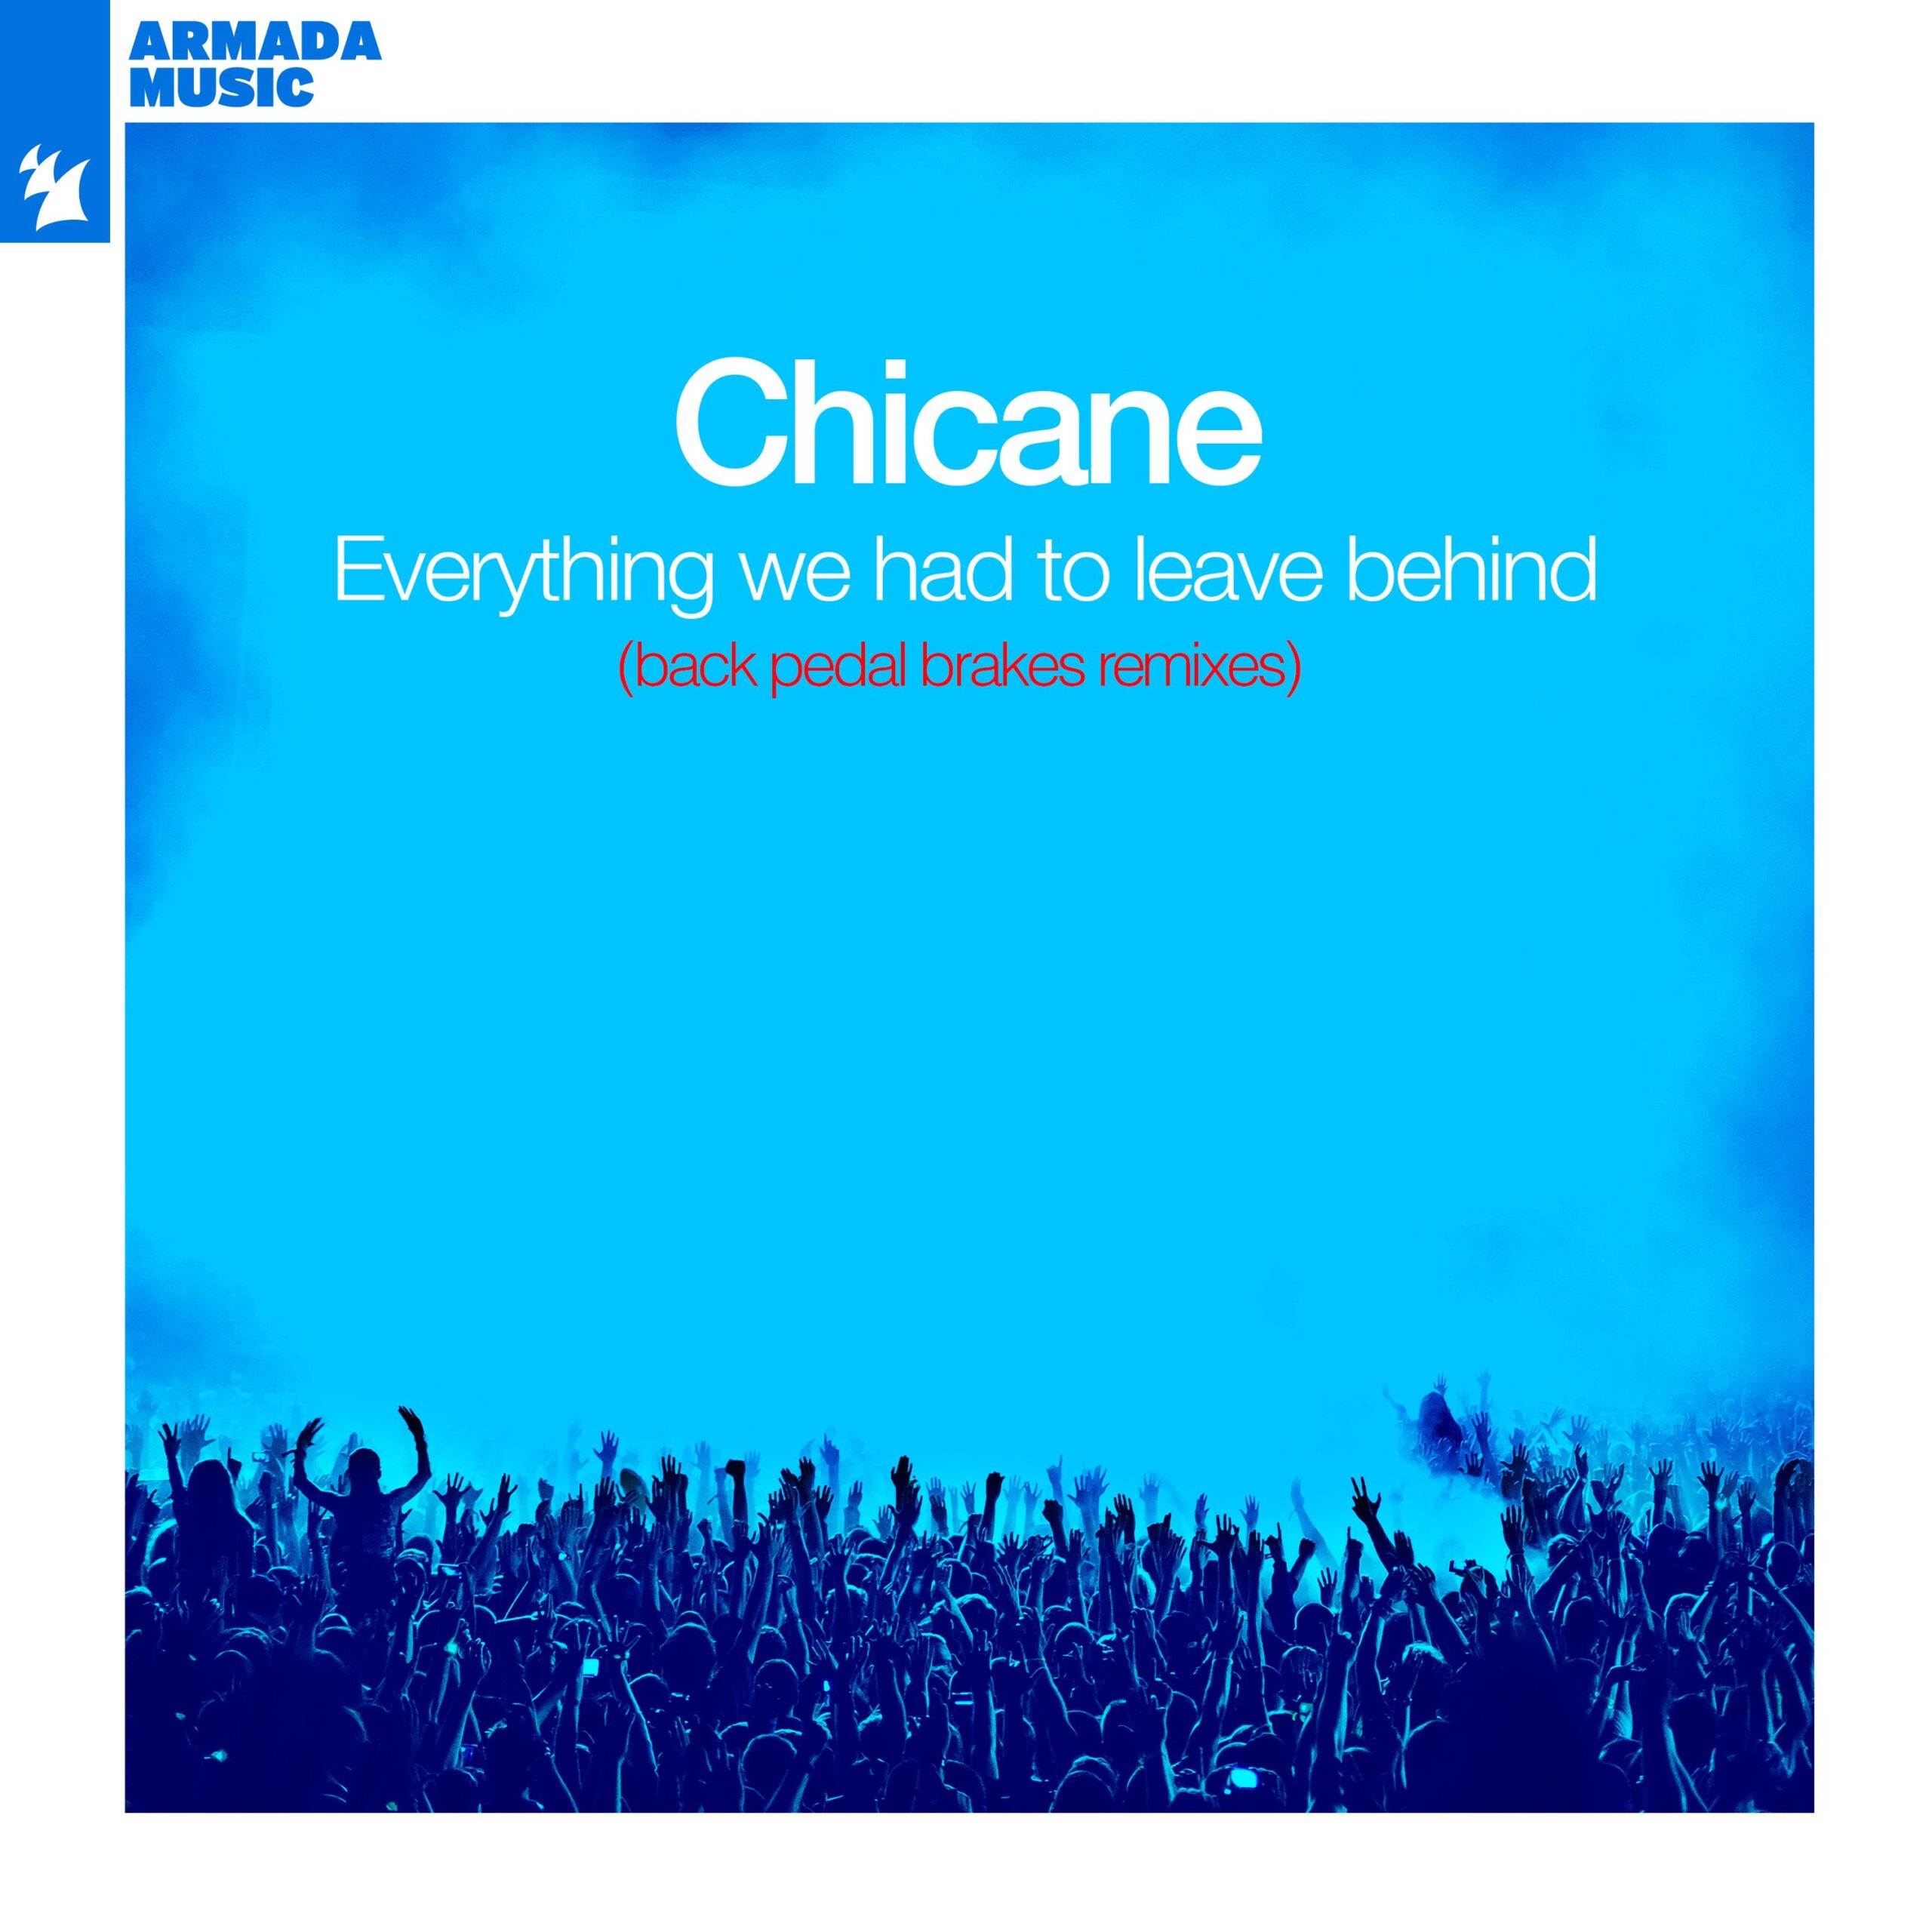 Chicane presents Everything We Had To Leave Behind (Back Pedal Brakes Remix) [ALBUM] on Armada Music